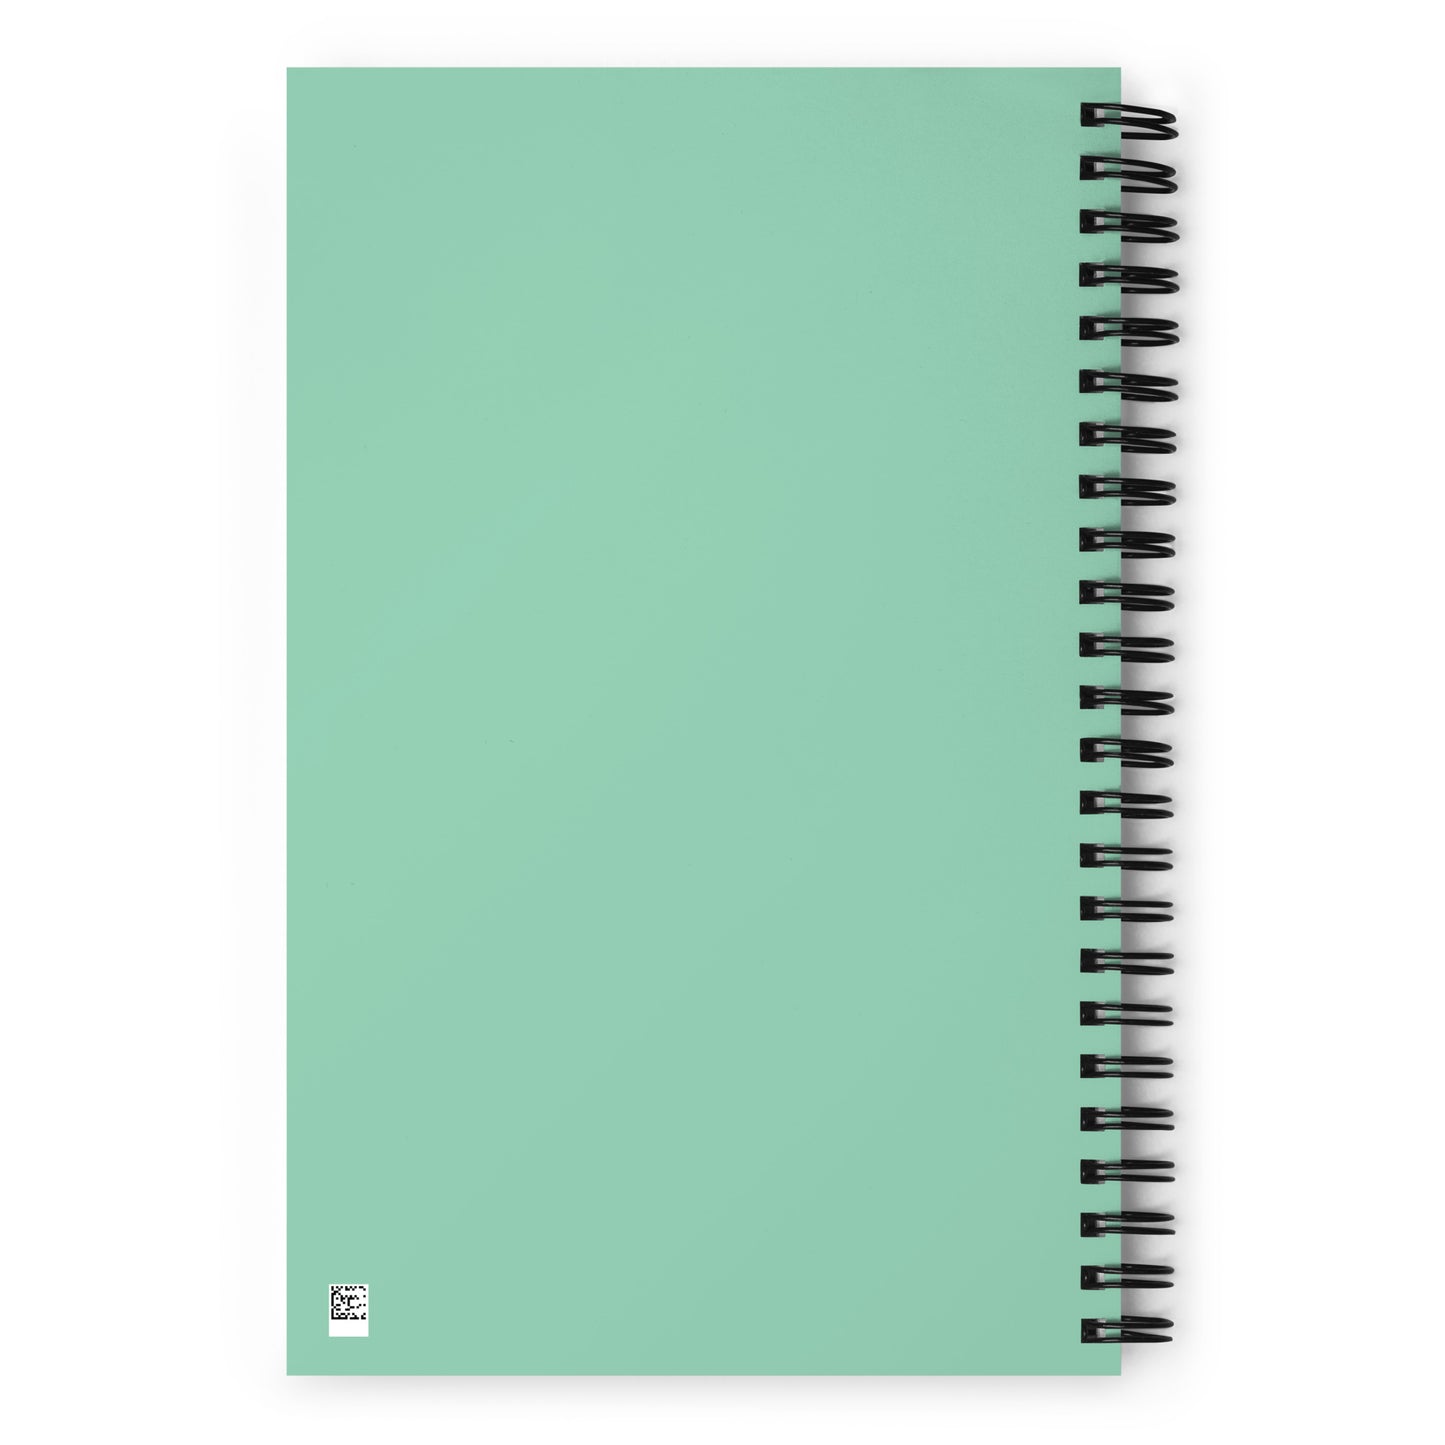 The coolest, cutest, best-selling spiral notebook for a female entrepreneur, CEO or girl boss.